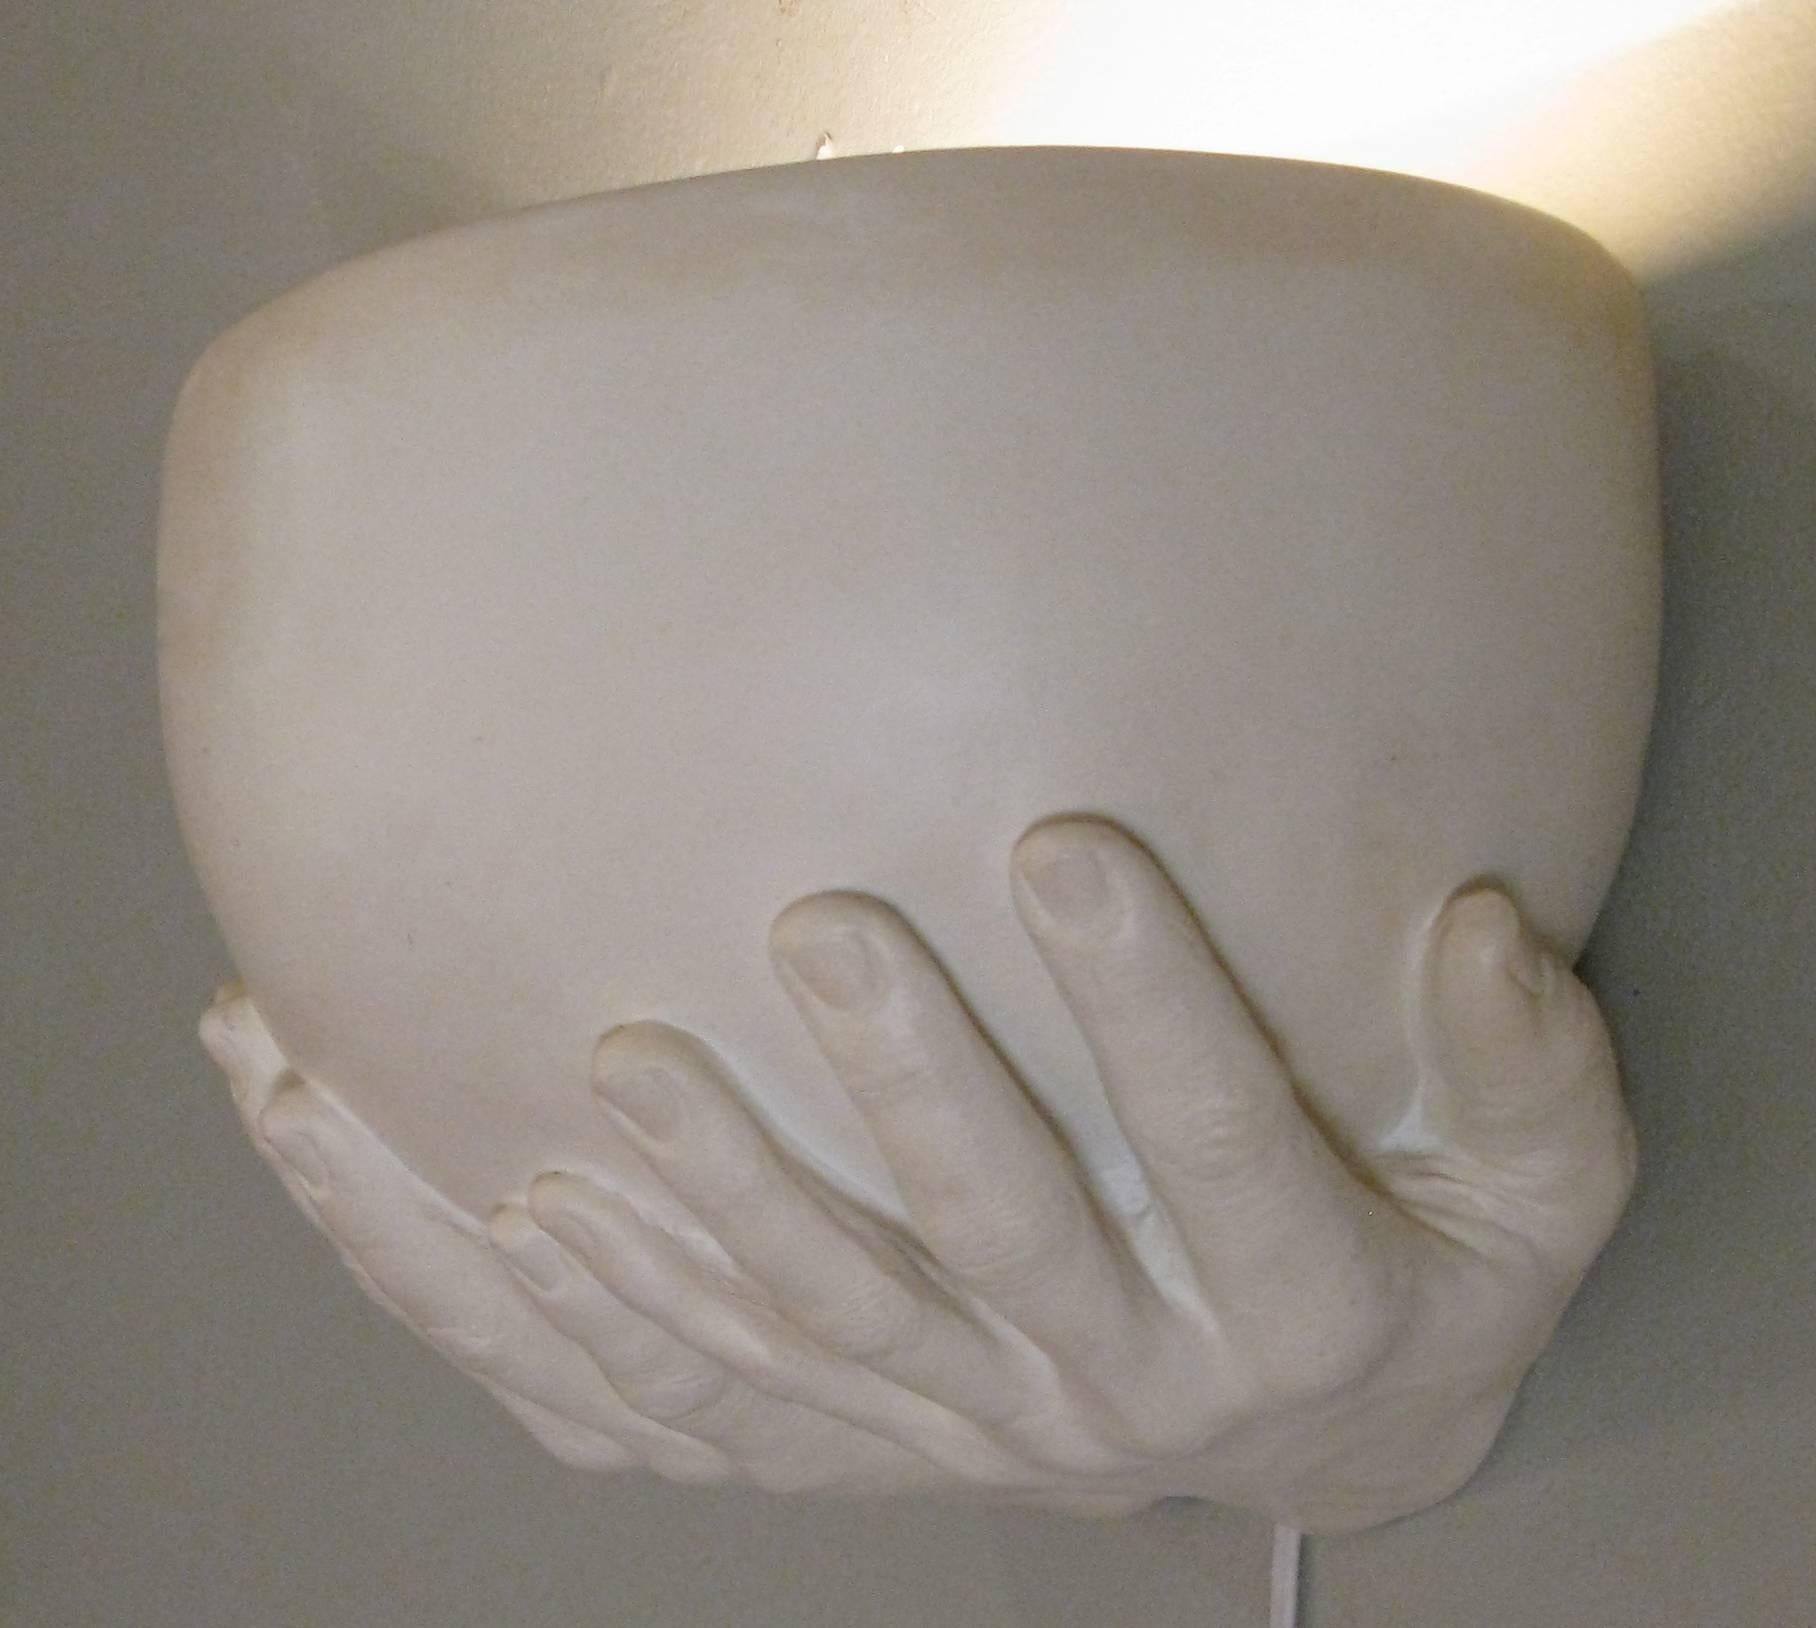 A beautiful plaster lighted wall sconce made by artist Richard Etts, from his iconic 'Hands' series. Crafted with a pair hands holding a half bowl with a single light socket. Signed and dated 'Richard Etts 1976'.
 